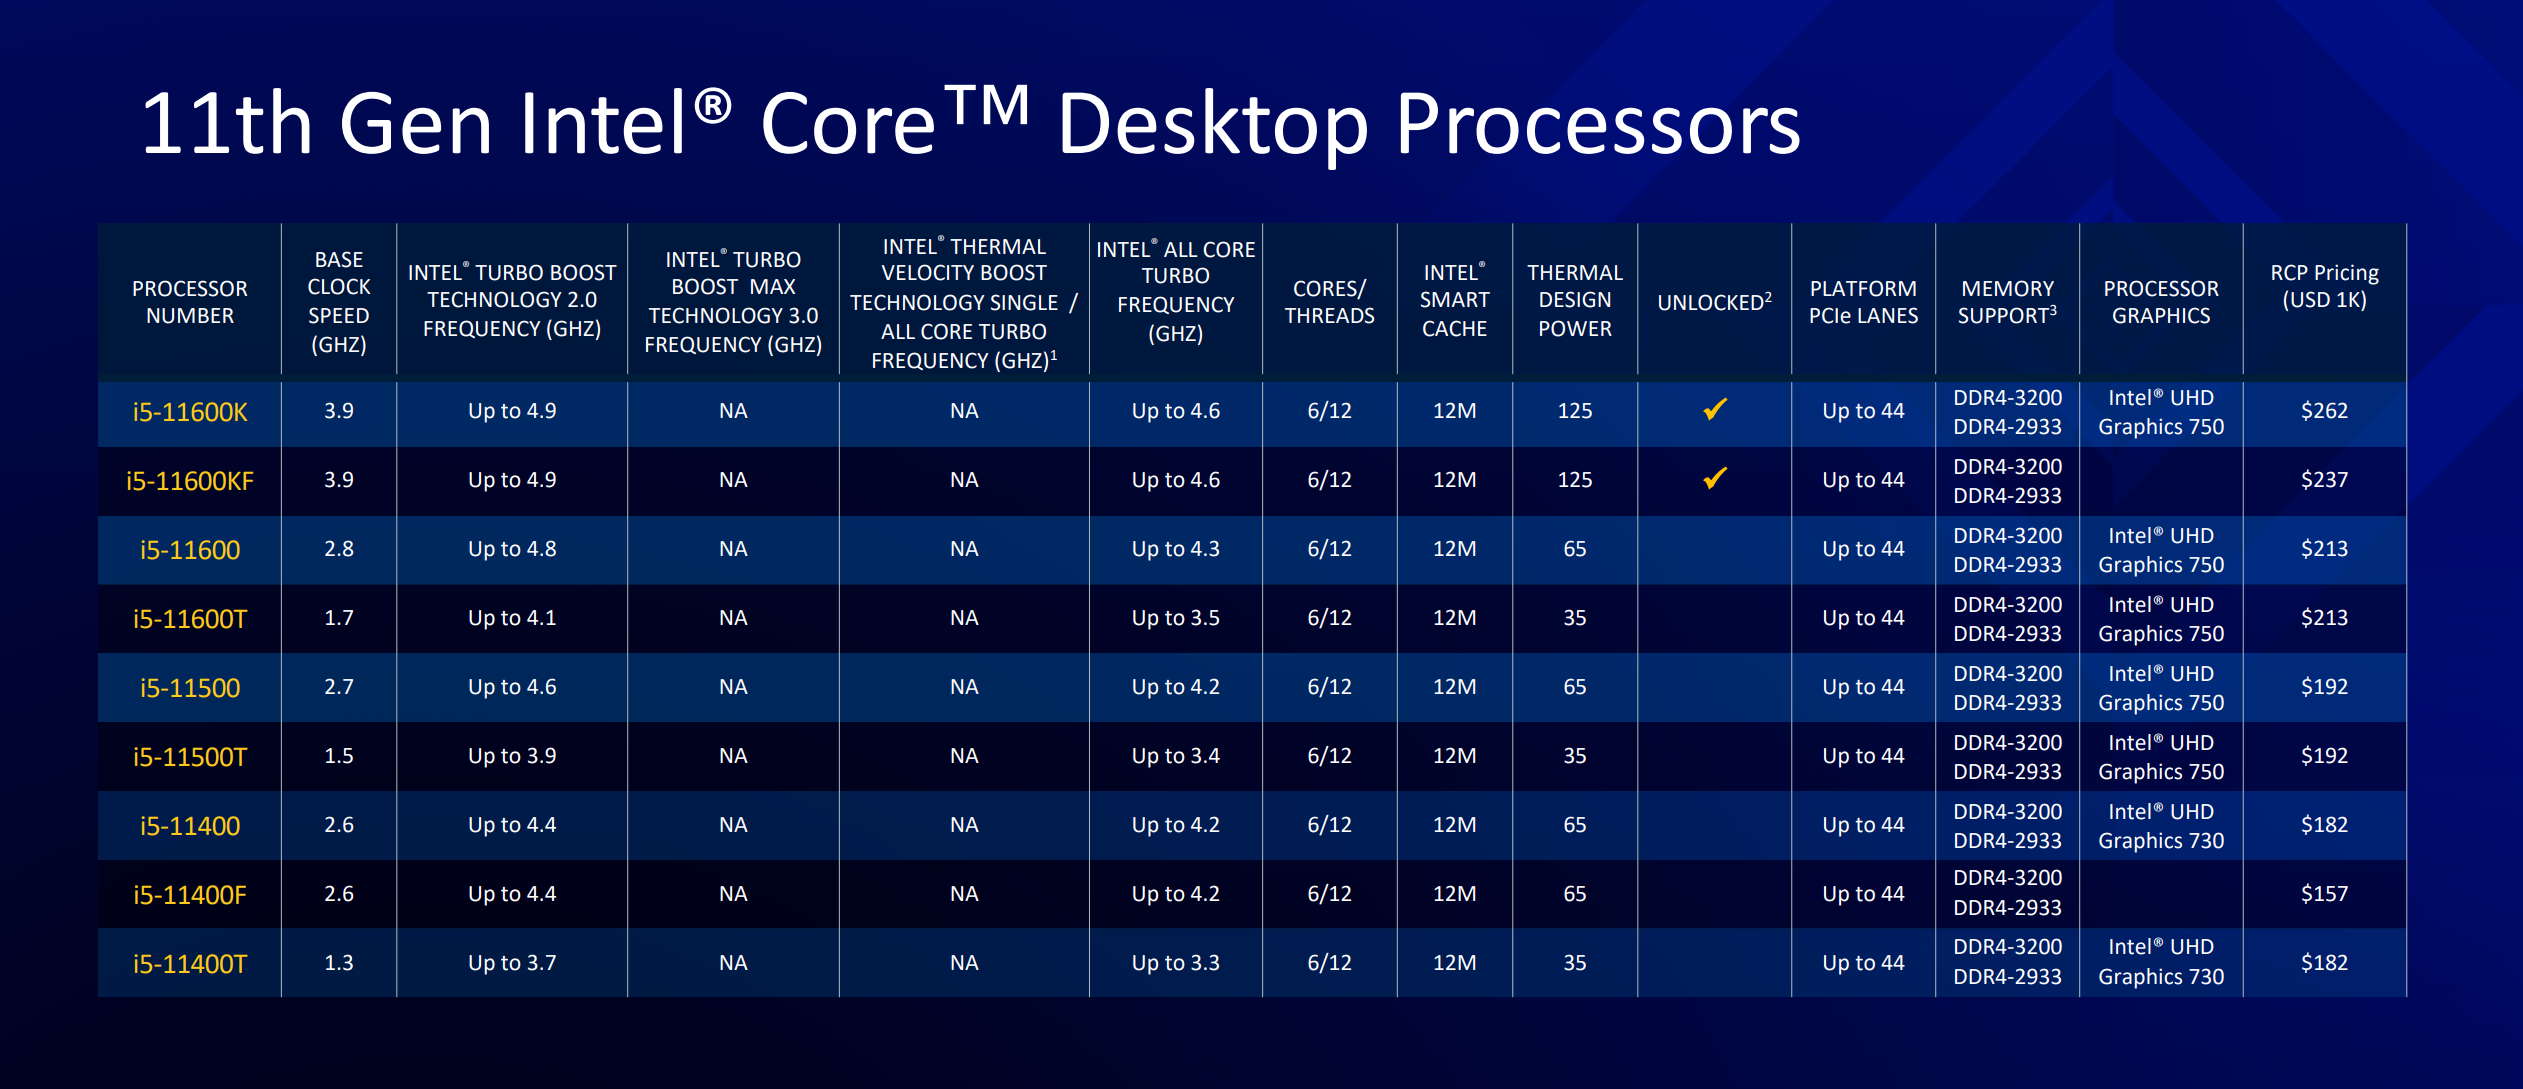 Intel Rocket Lake specifications and pricing